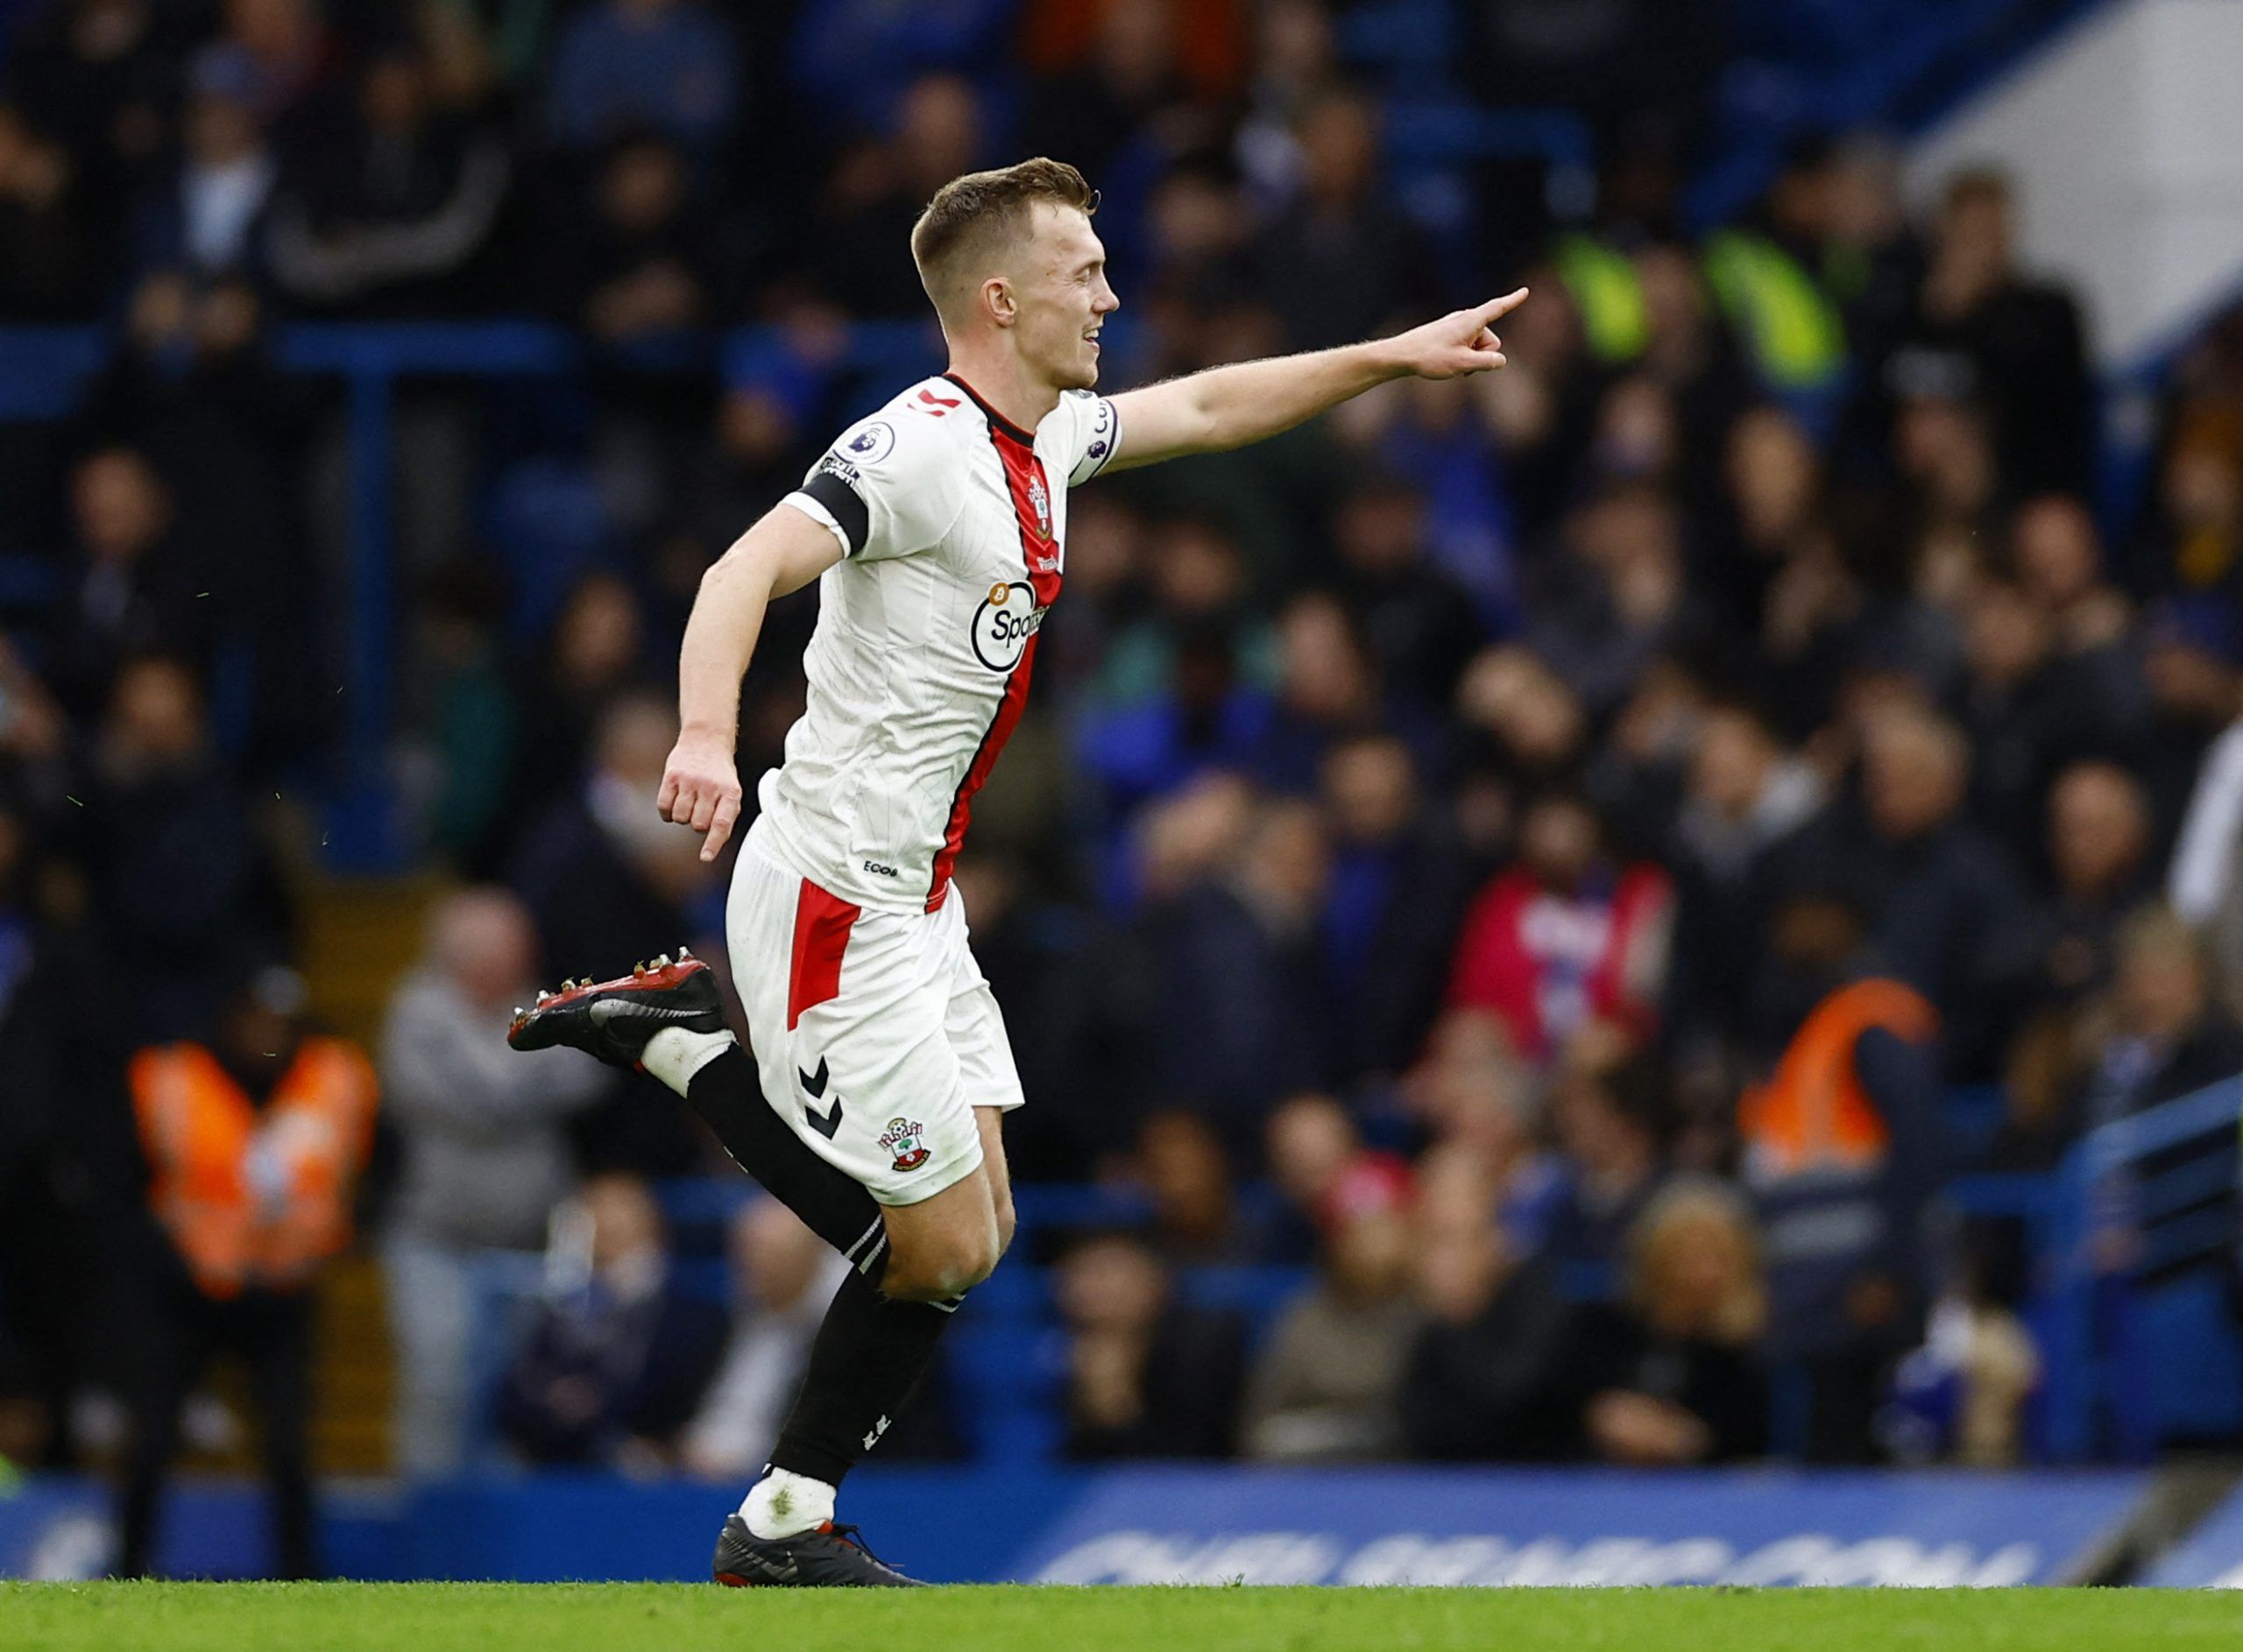 Soccer Football - Premier League - Chelsea v Southampton - Stamford Bridge, London, Britain - February 18, 2023 Southampton's James Ward-Prowse celebrates scoring their first goal Action Images via Reuters/Andrew Boyers EDITORIAL USE ONLY. No use with unauthorized audio, video, data, fixture lists, club/league logos or 'live' services. Online in-match use limited to 75 images, no video emulation. No use in betting, games or single club /league/player publications.  Please contact your account re